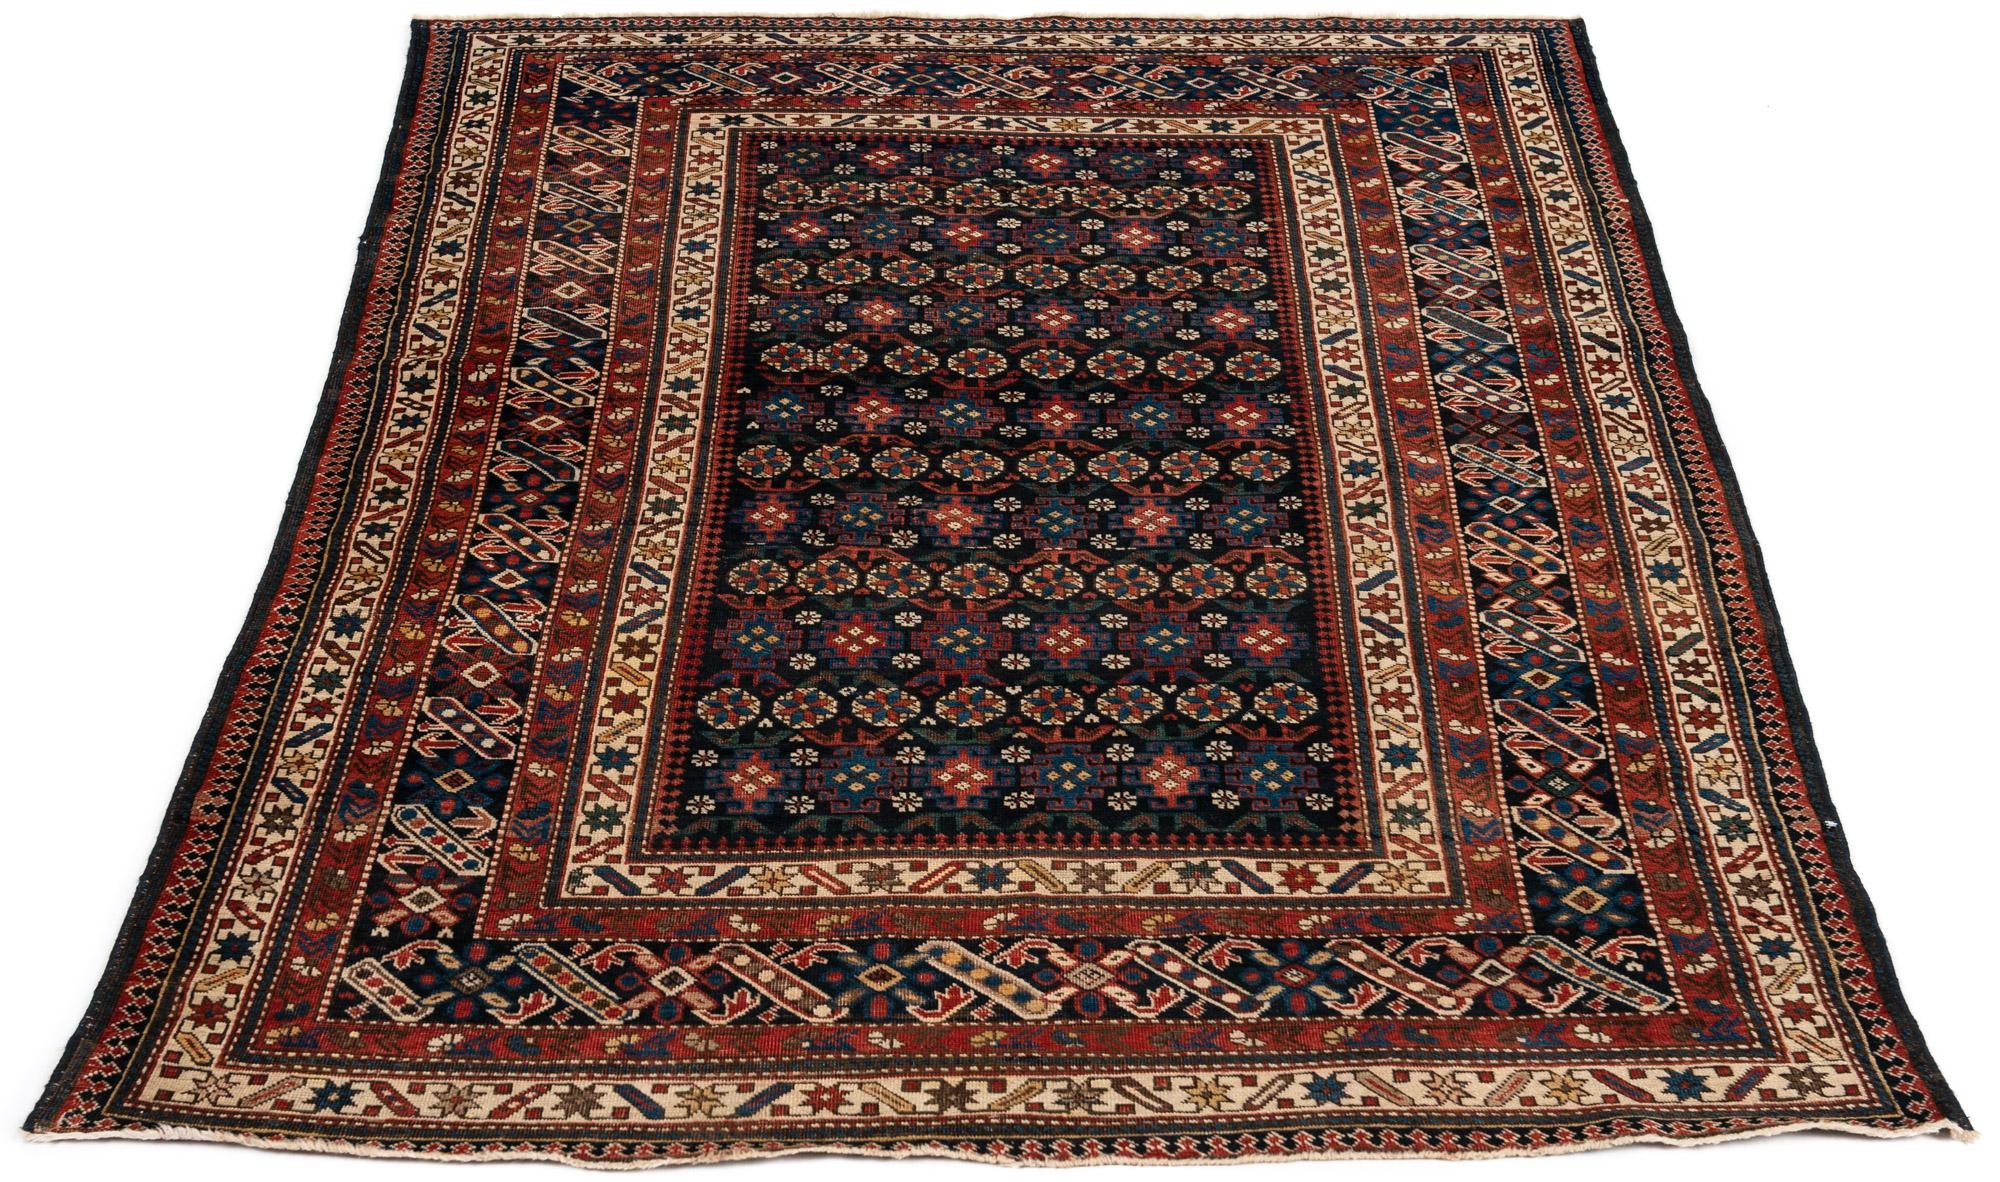 Hand-Knotted Antique Caucasian Chi-Chi Kuba Decorative Rug in Navy, Coral, Green and Yellow